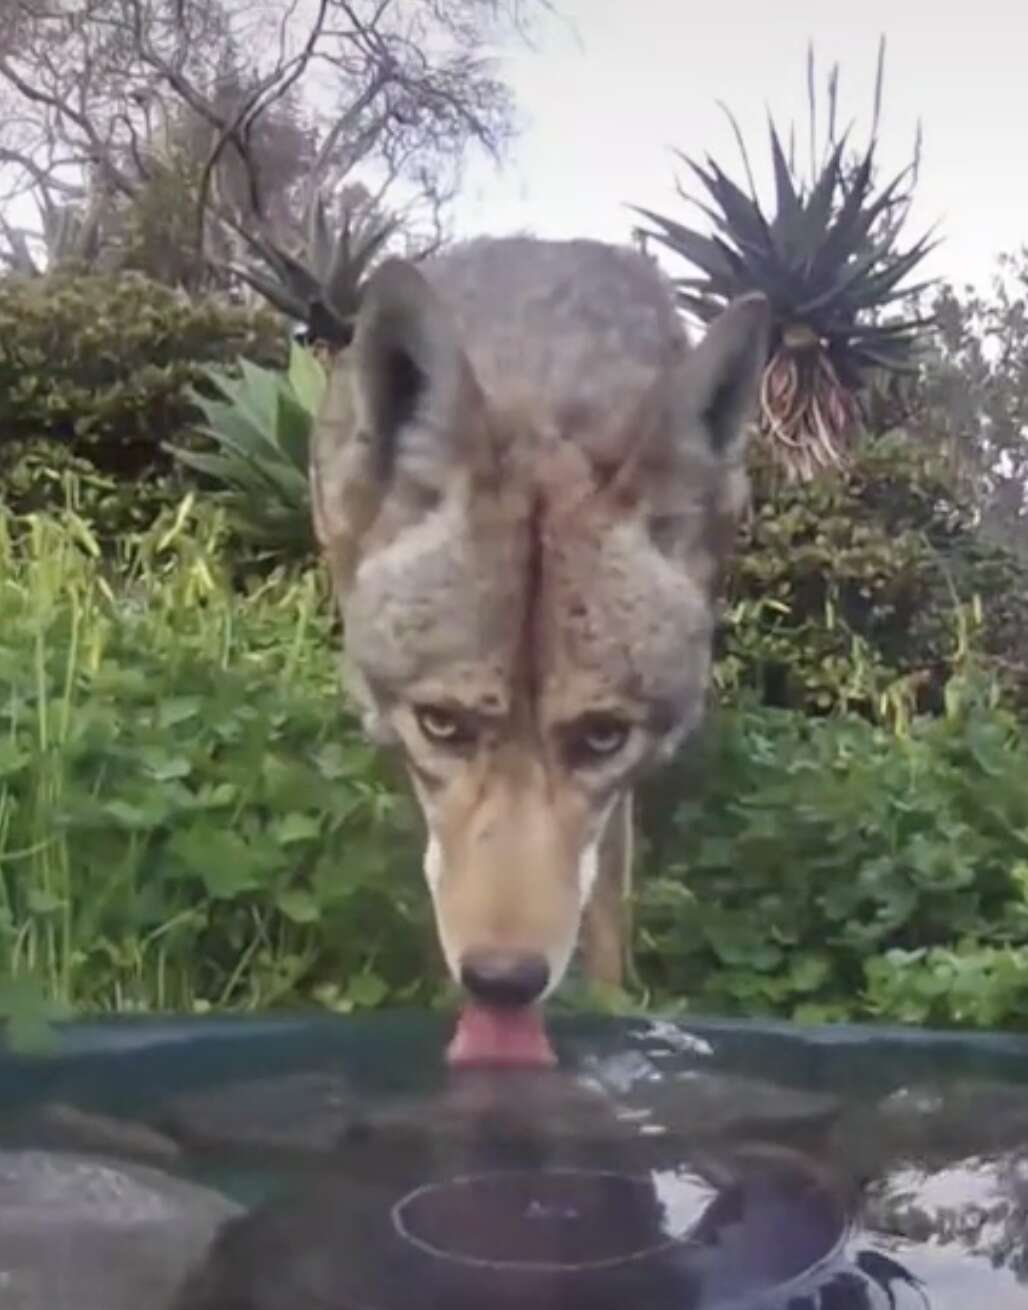 Coyote drinks from waterfountain